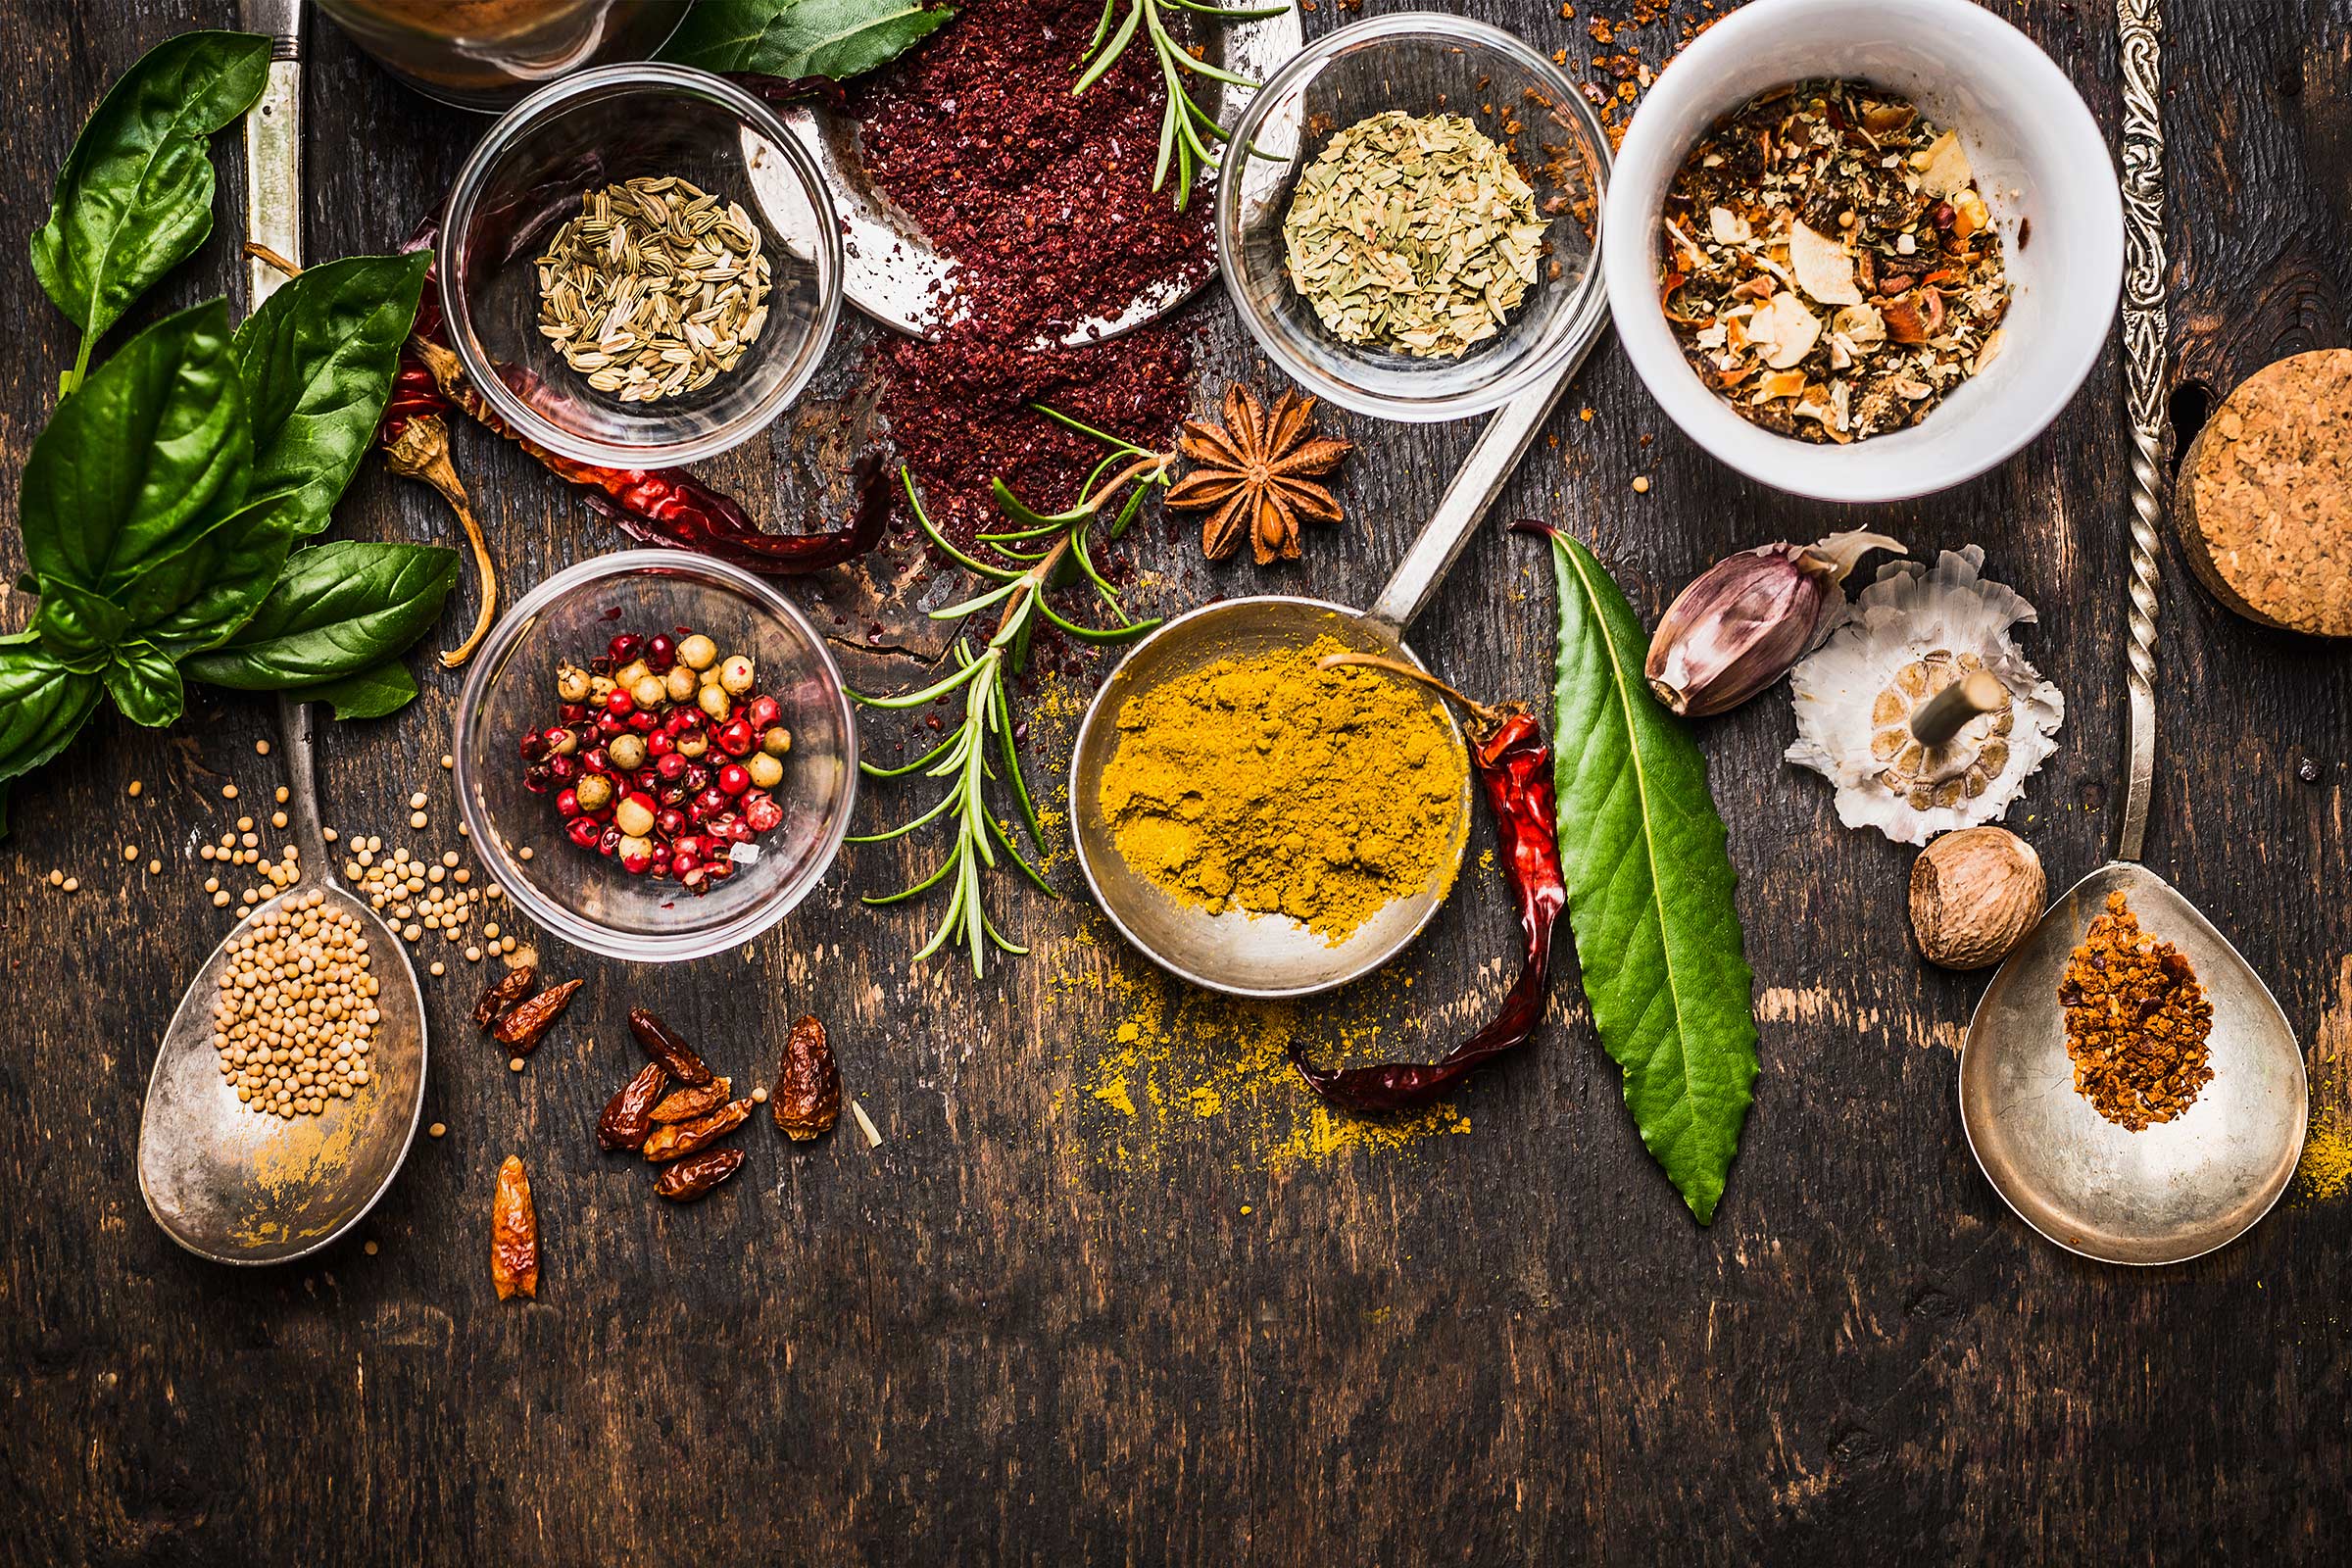 Spices and Flavors are Great for Wellbeing